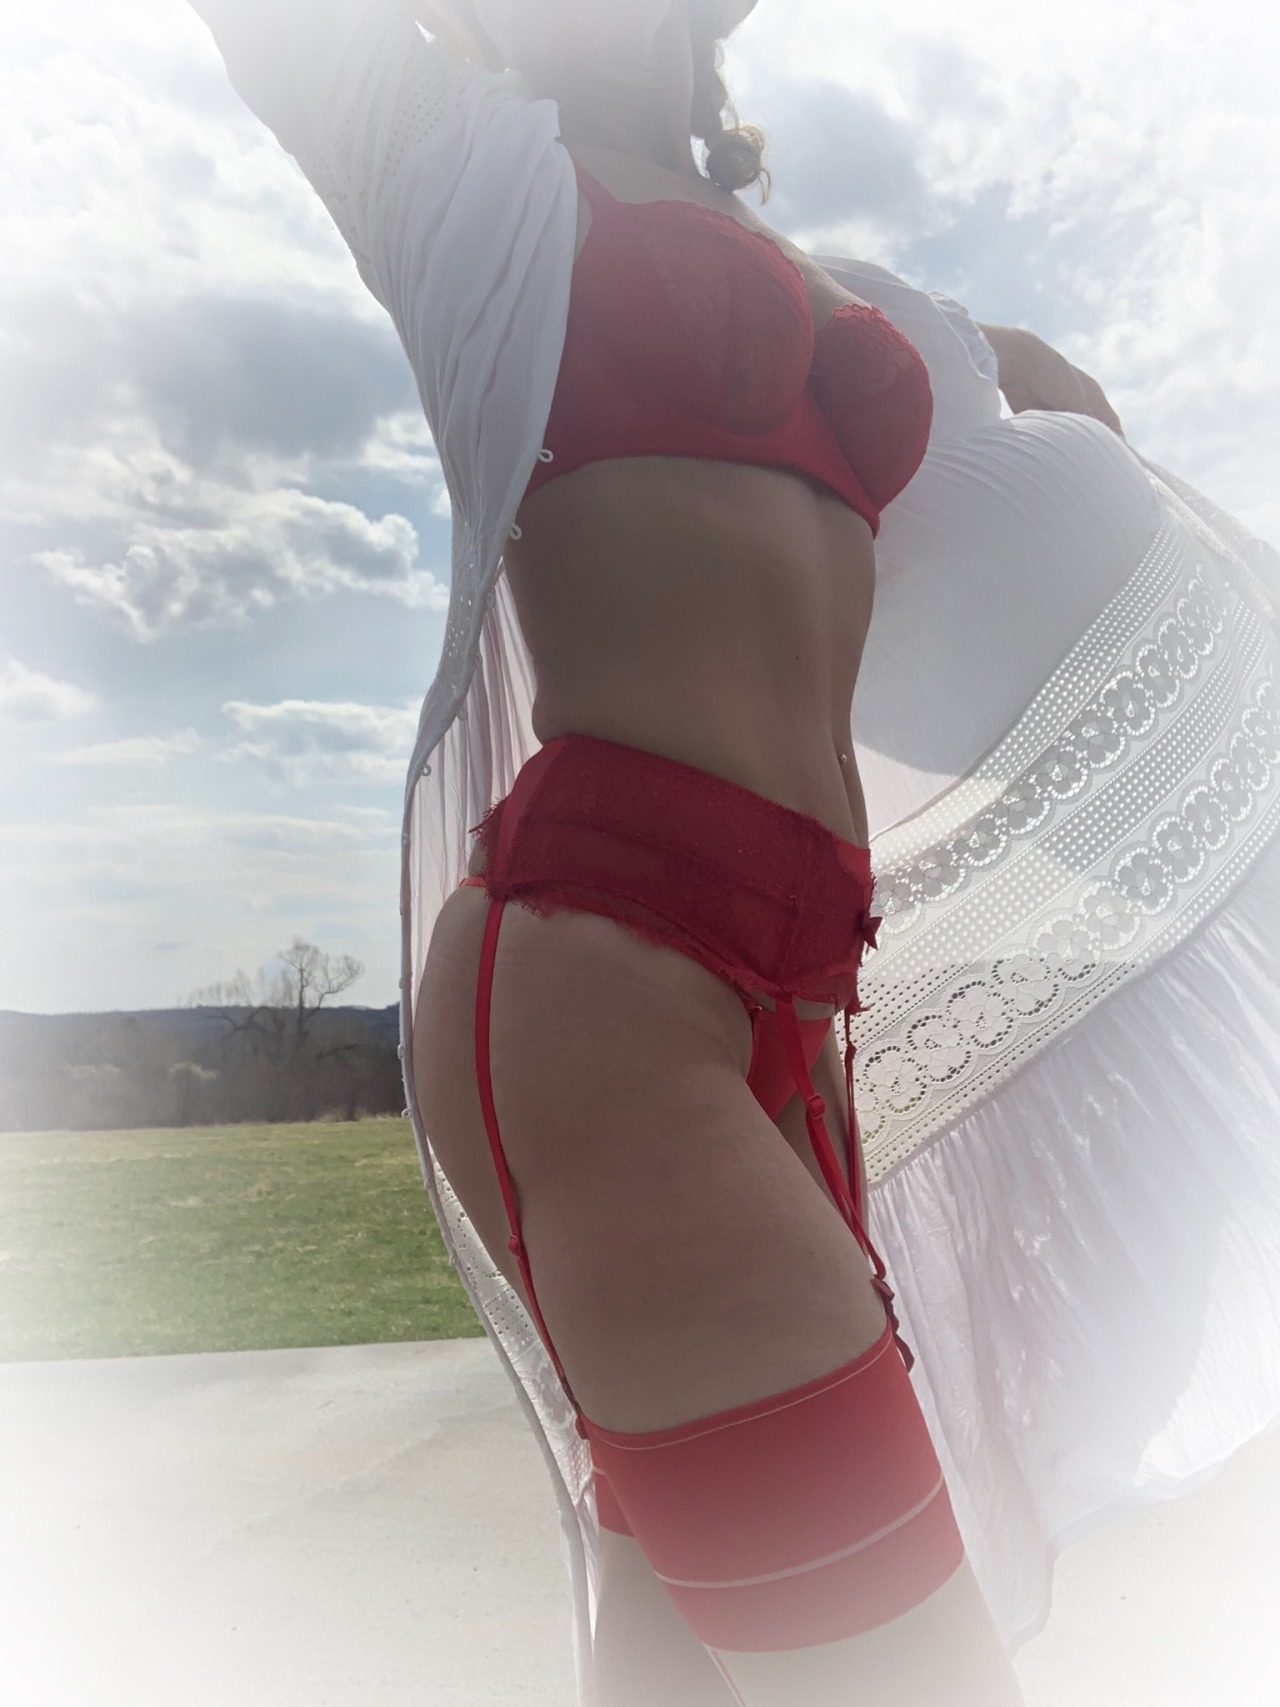 sexymaturelady:My Easter outfit!  I was going adult photos